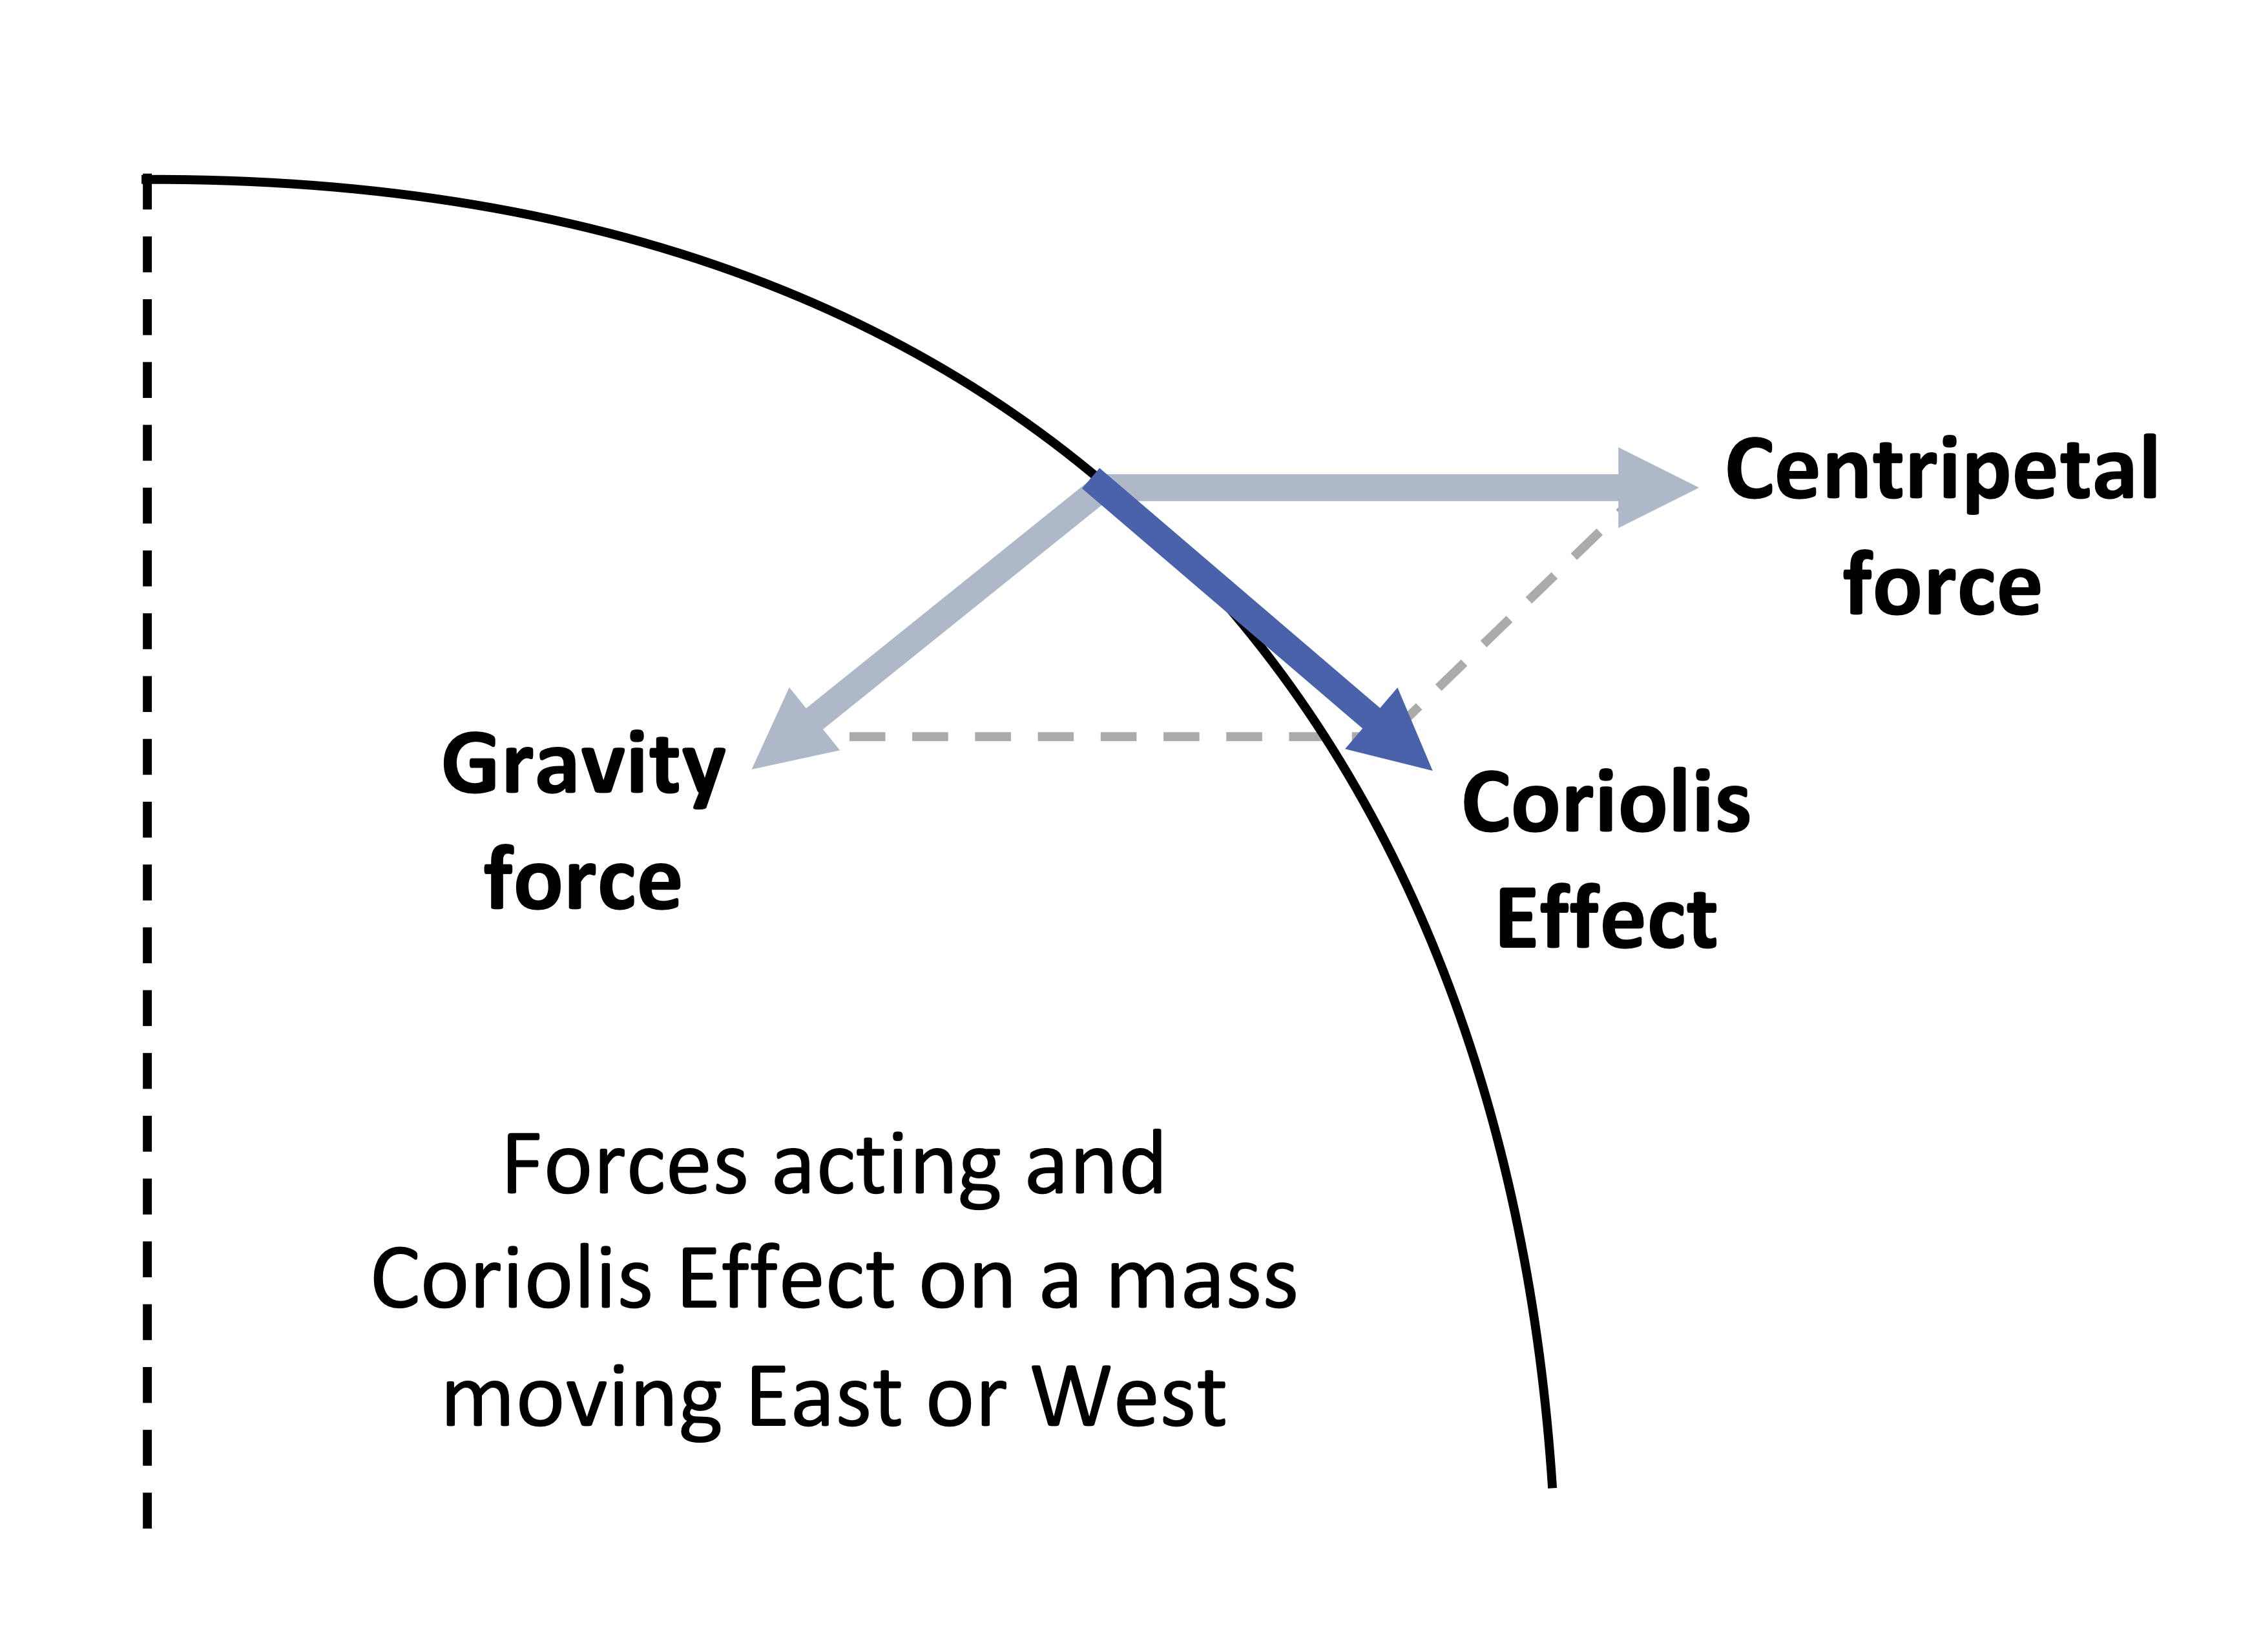 Effect of gravity and the centripetal force to produce the Coriolis Effect on an E-W moving mass on the rotating Earth